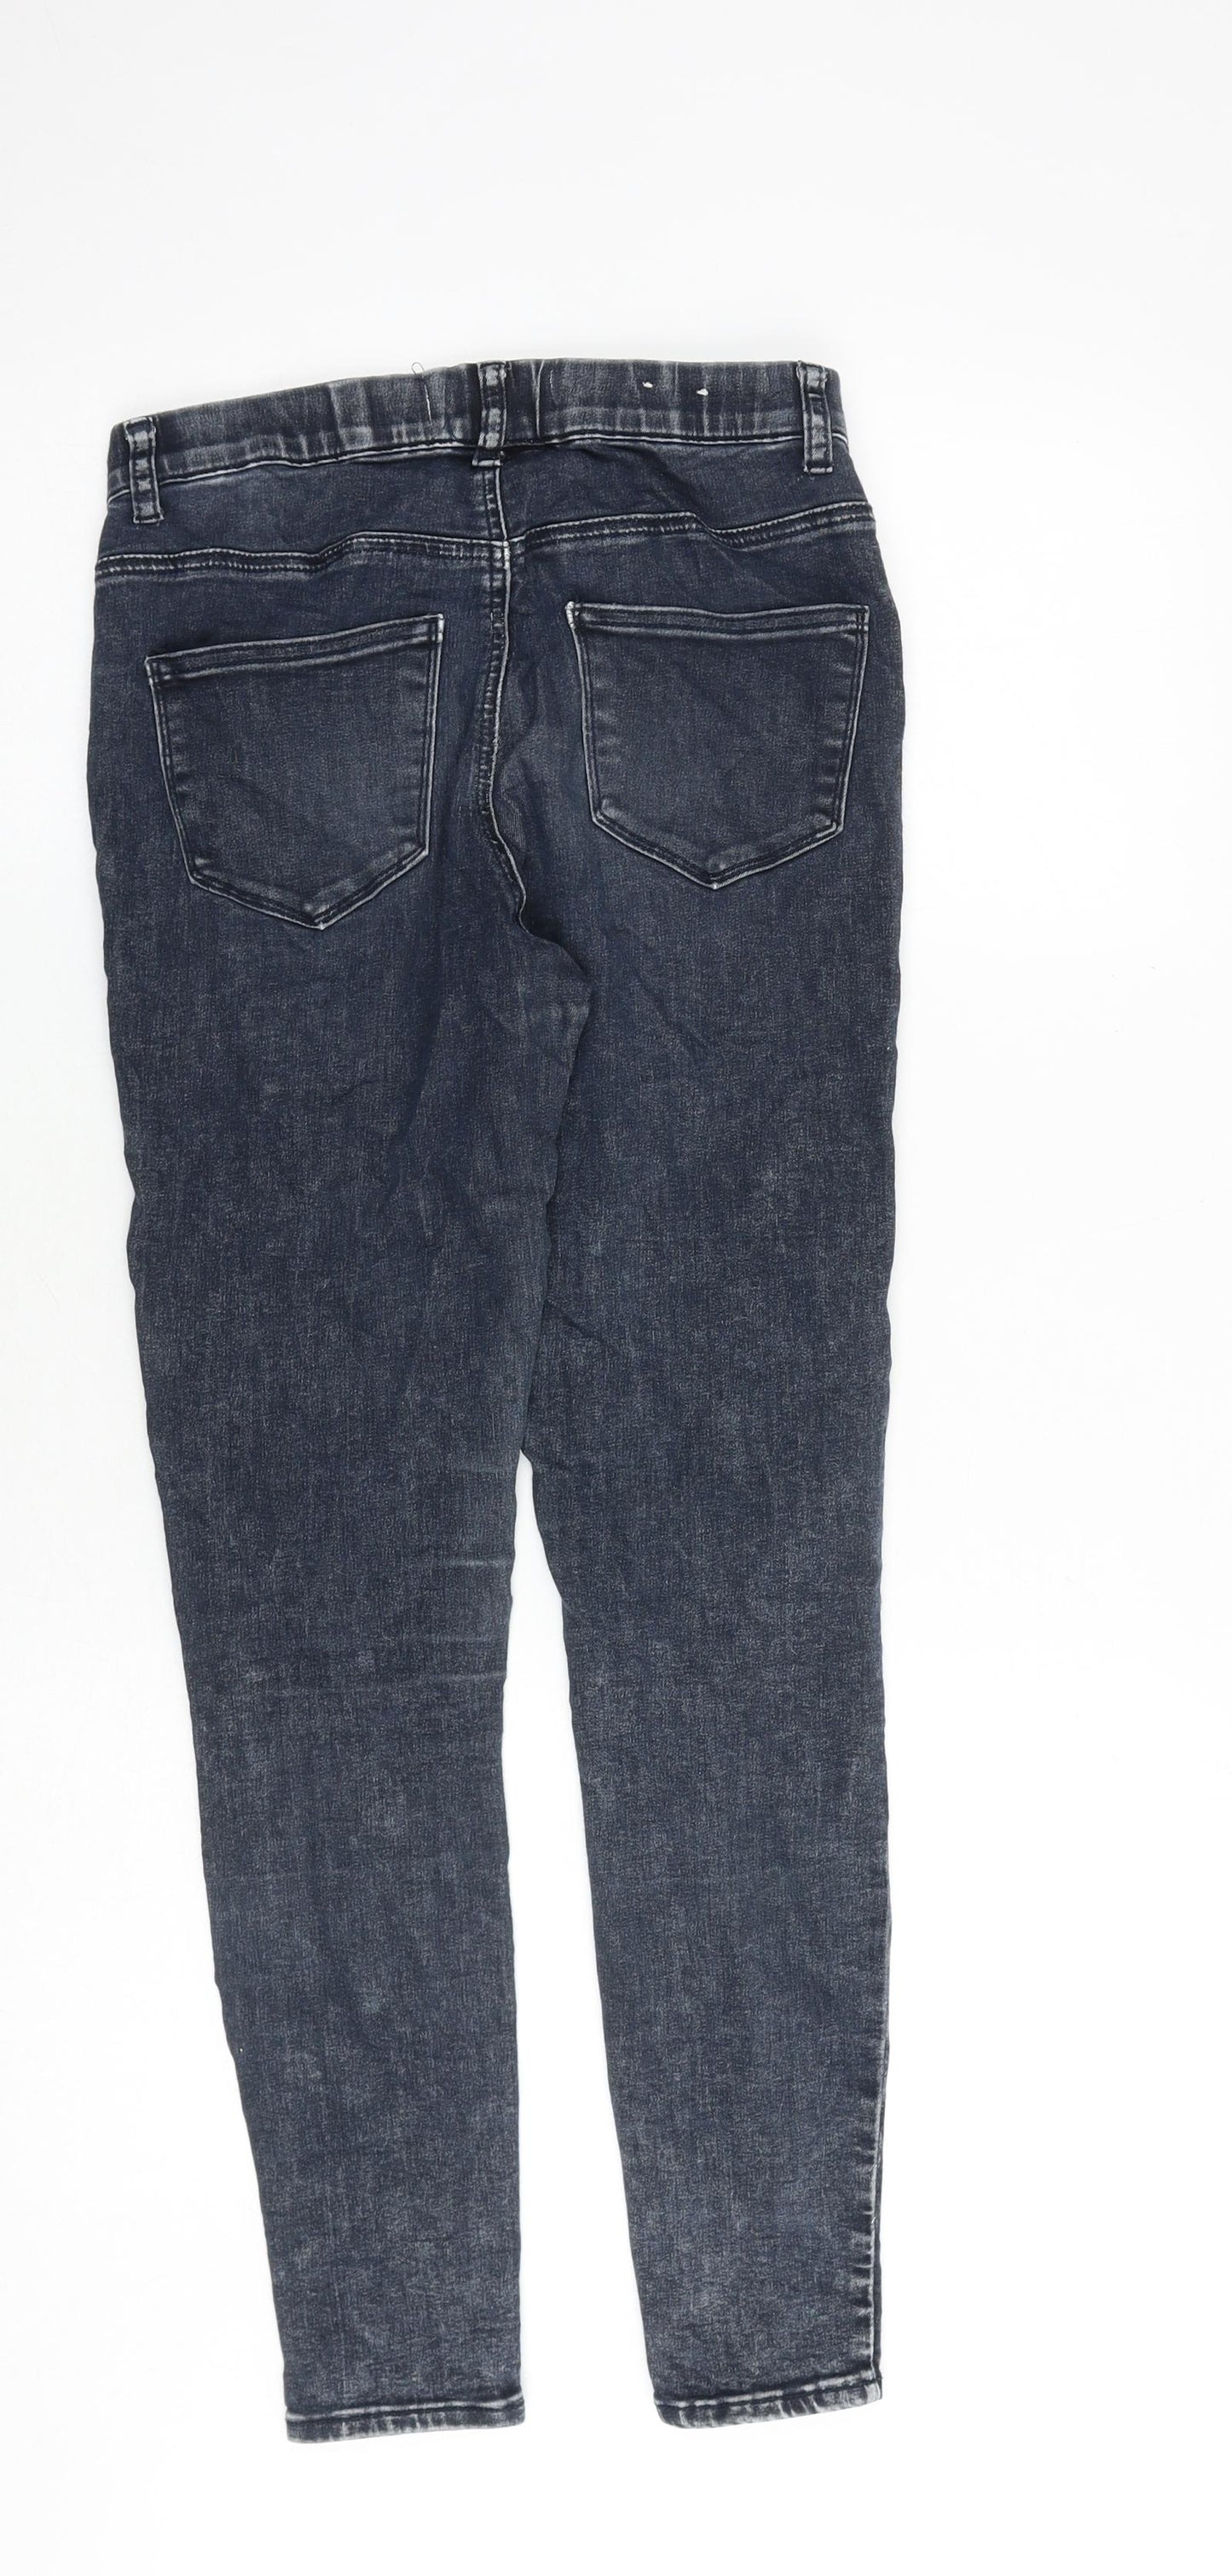 New Look Womens Blue Cotton Jegging Jeans Size 10 Regular